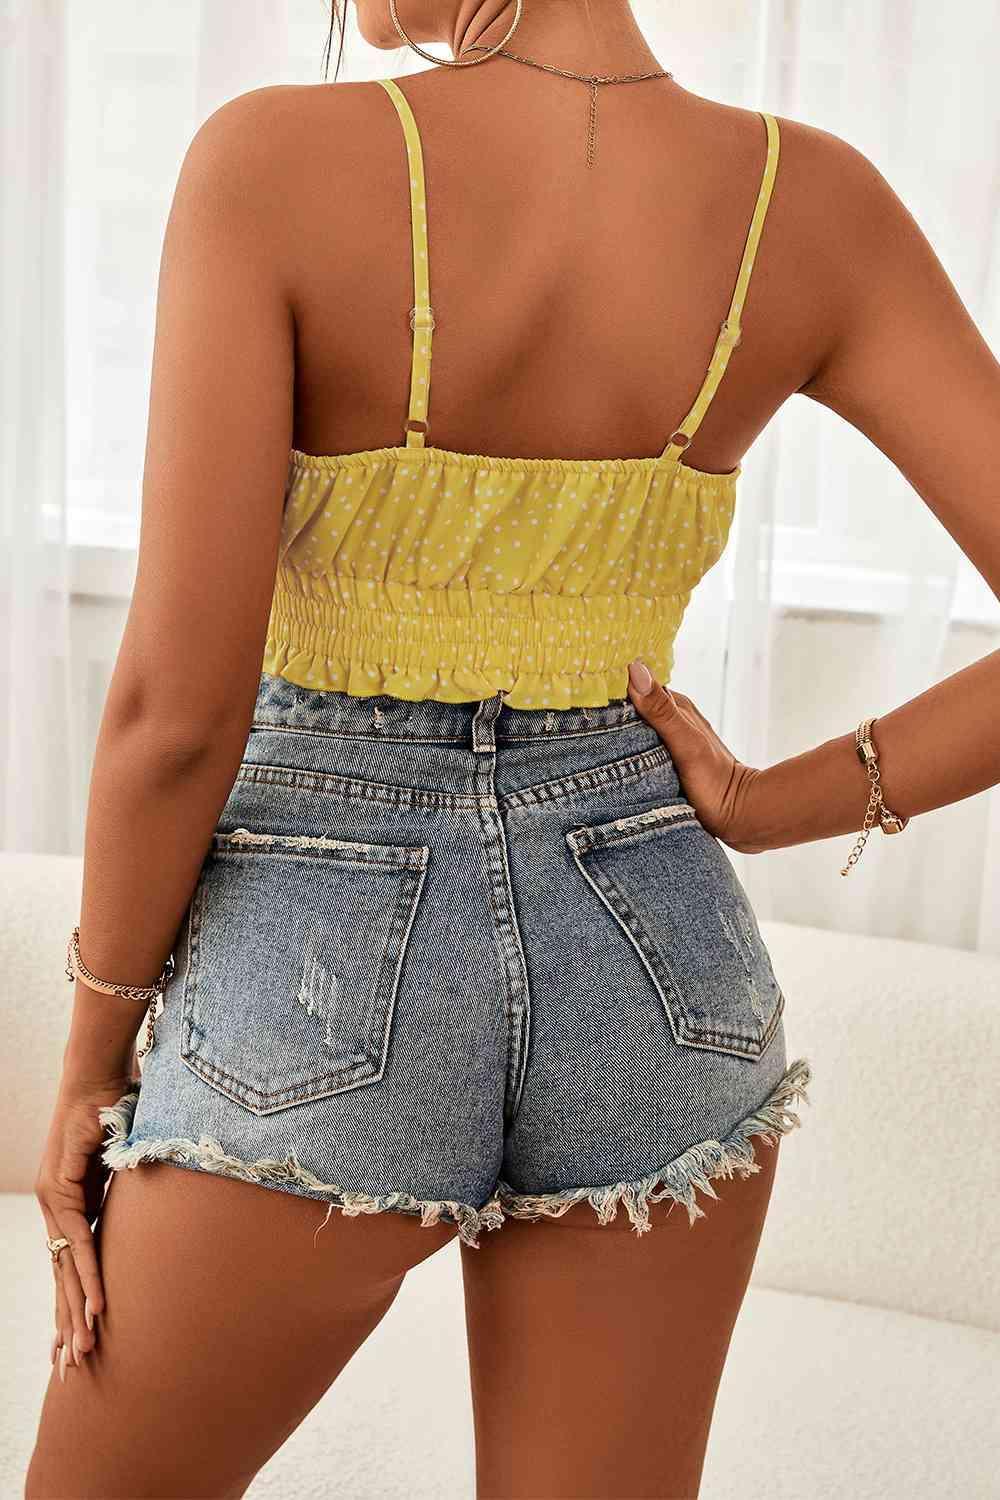 a woman wearing a yellow top and denim shorts